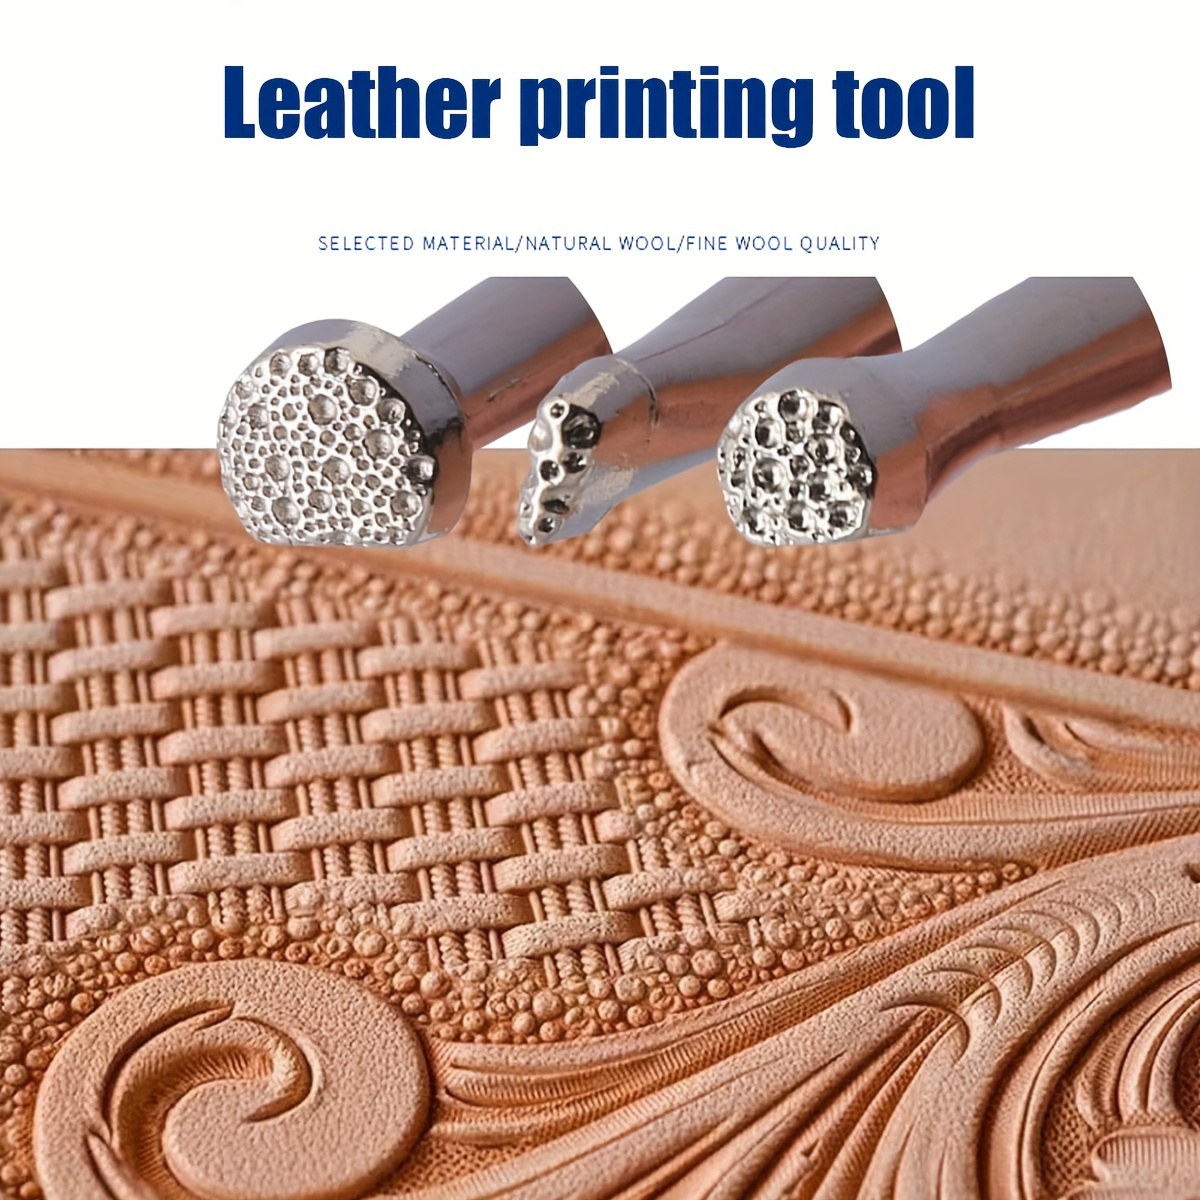 21PCS Leather Working Tools Leather Embossing Tools Leather Kits for  Beginner Leather Stamping Carving Kit Punch Wooden Hammer